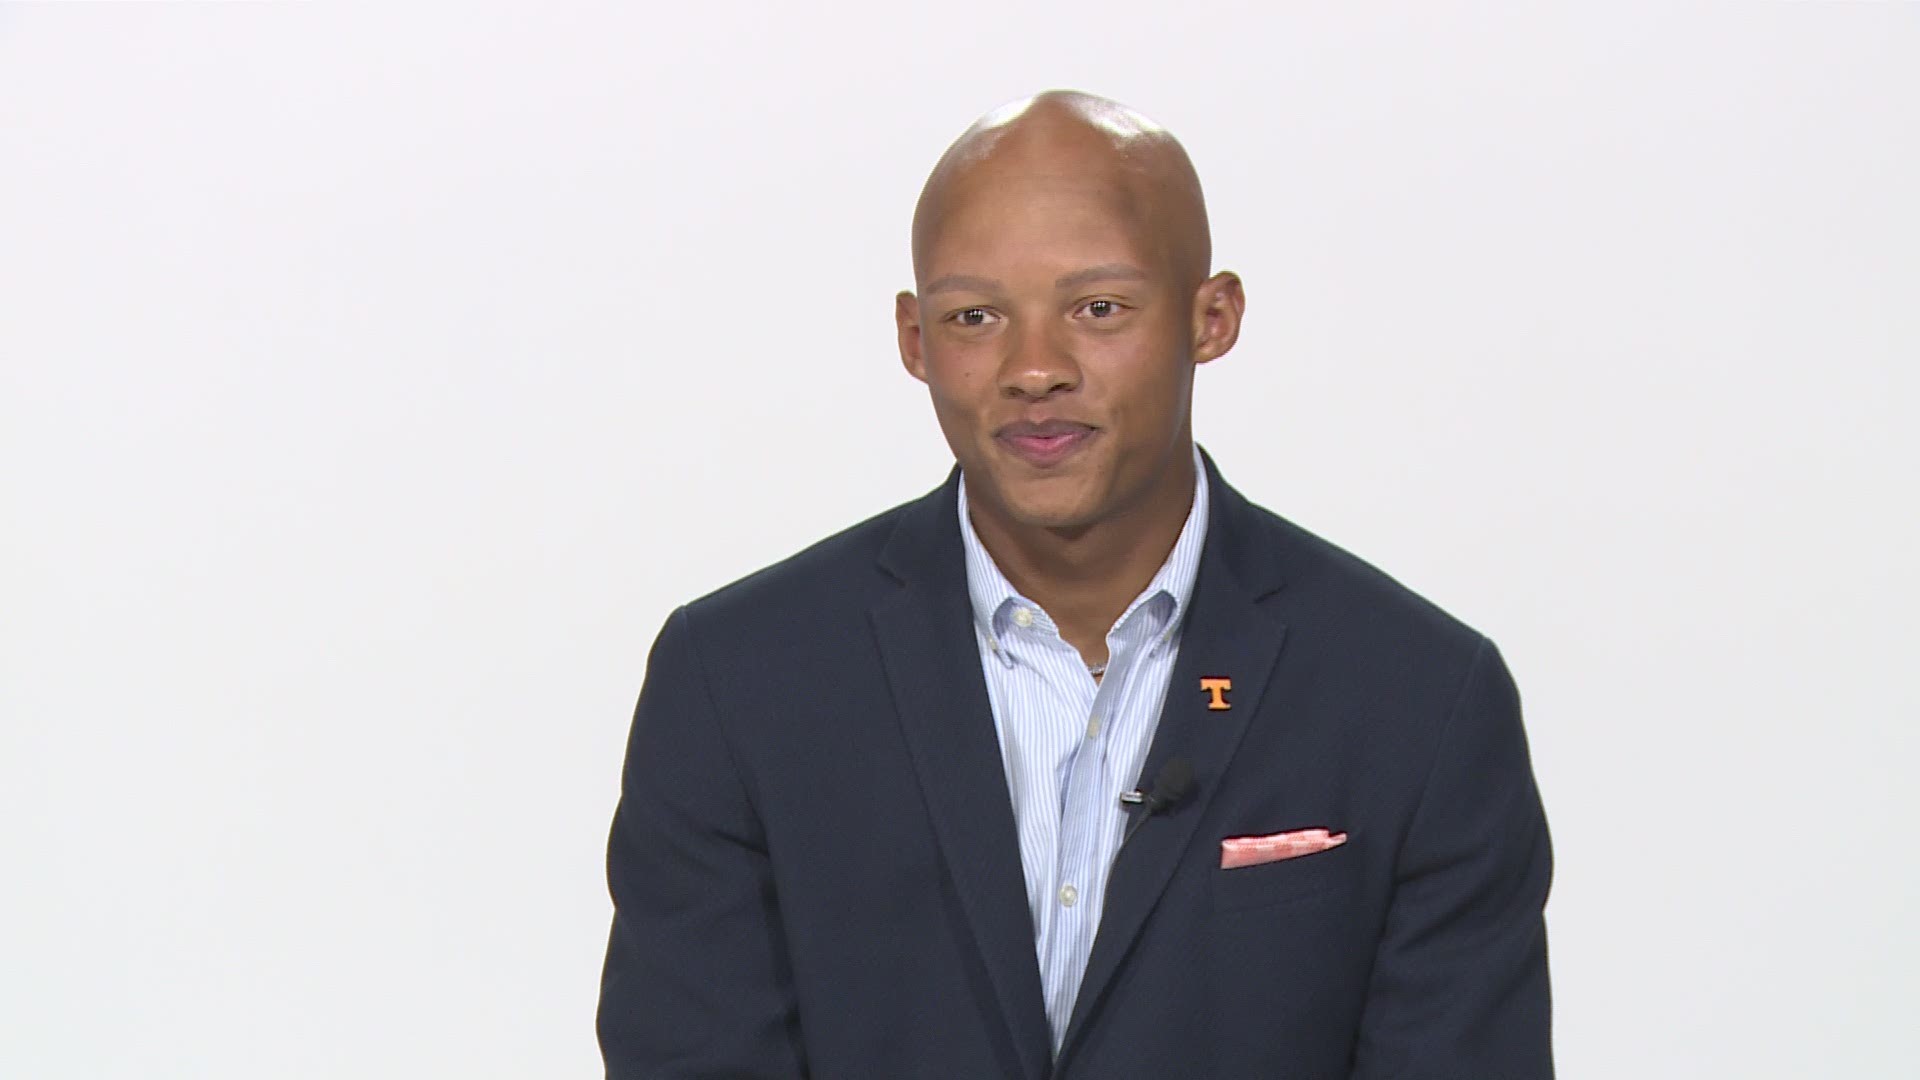 Joshua Dobbs sits down with WBIR to talk about his upcoming season with the Pittsburgh Steelers and his return to Knoxville.